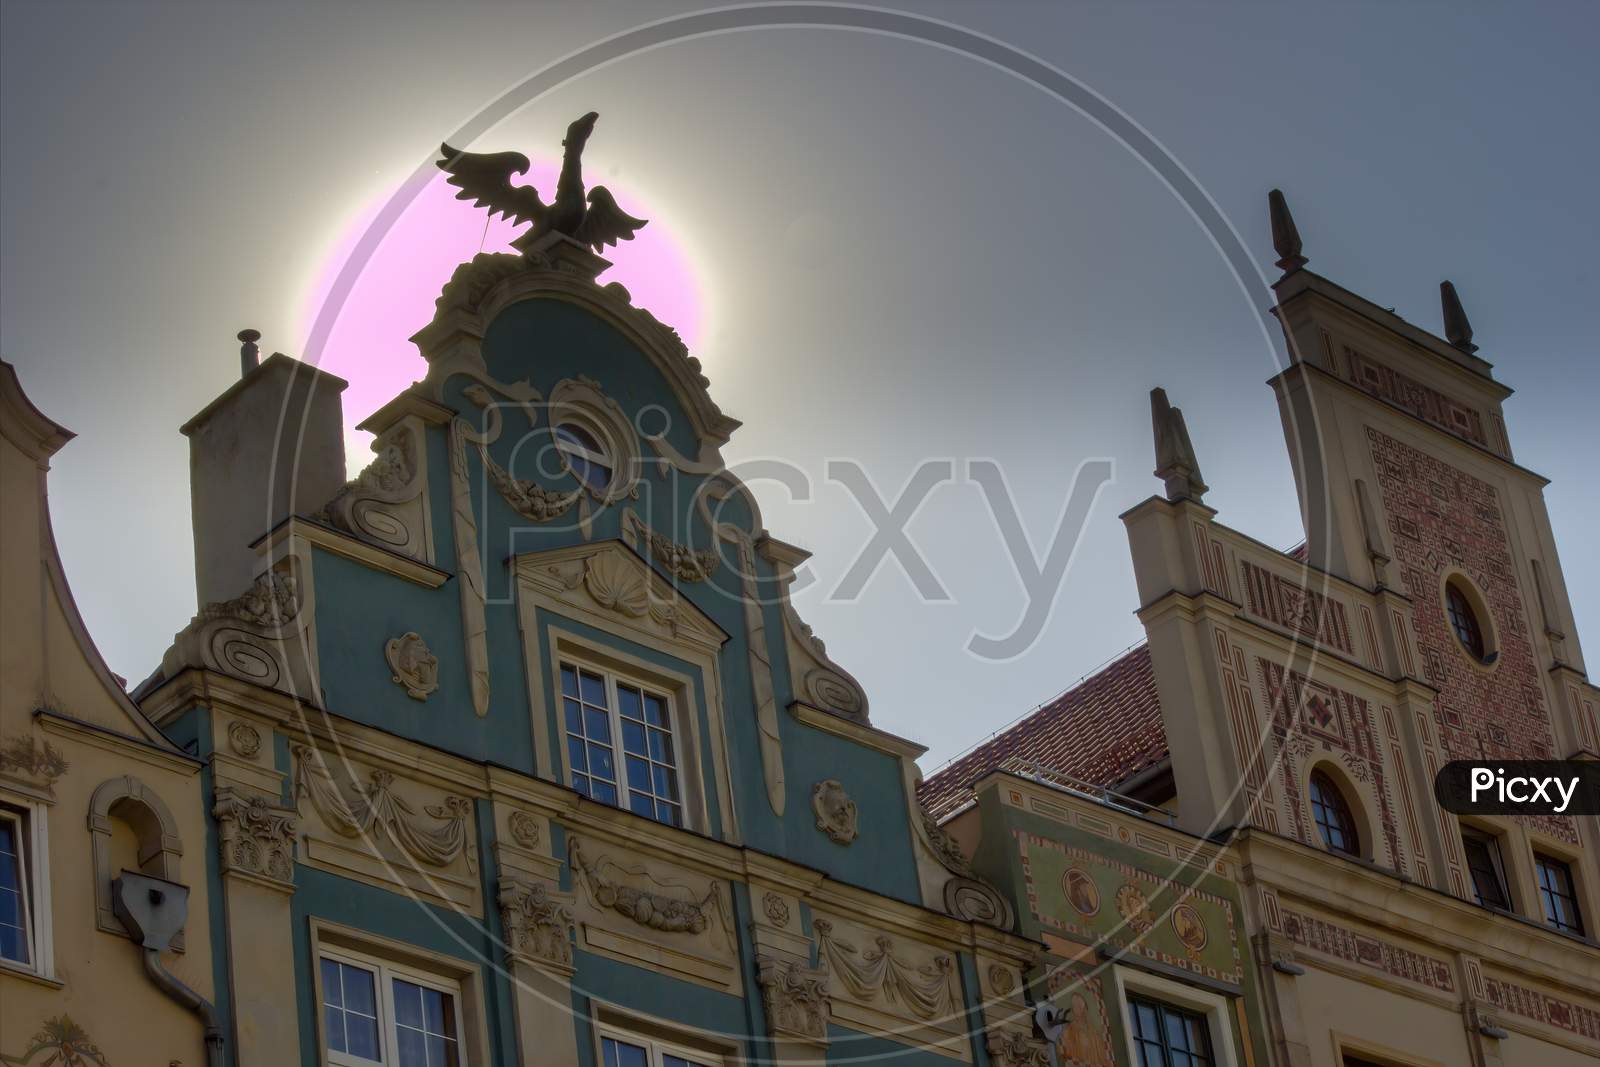 Gdansk, North Poland - August 15, 2020: Polish Architecture In The Old Town At The Famous City Center Against Sun